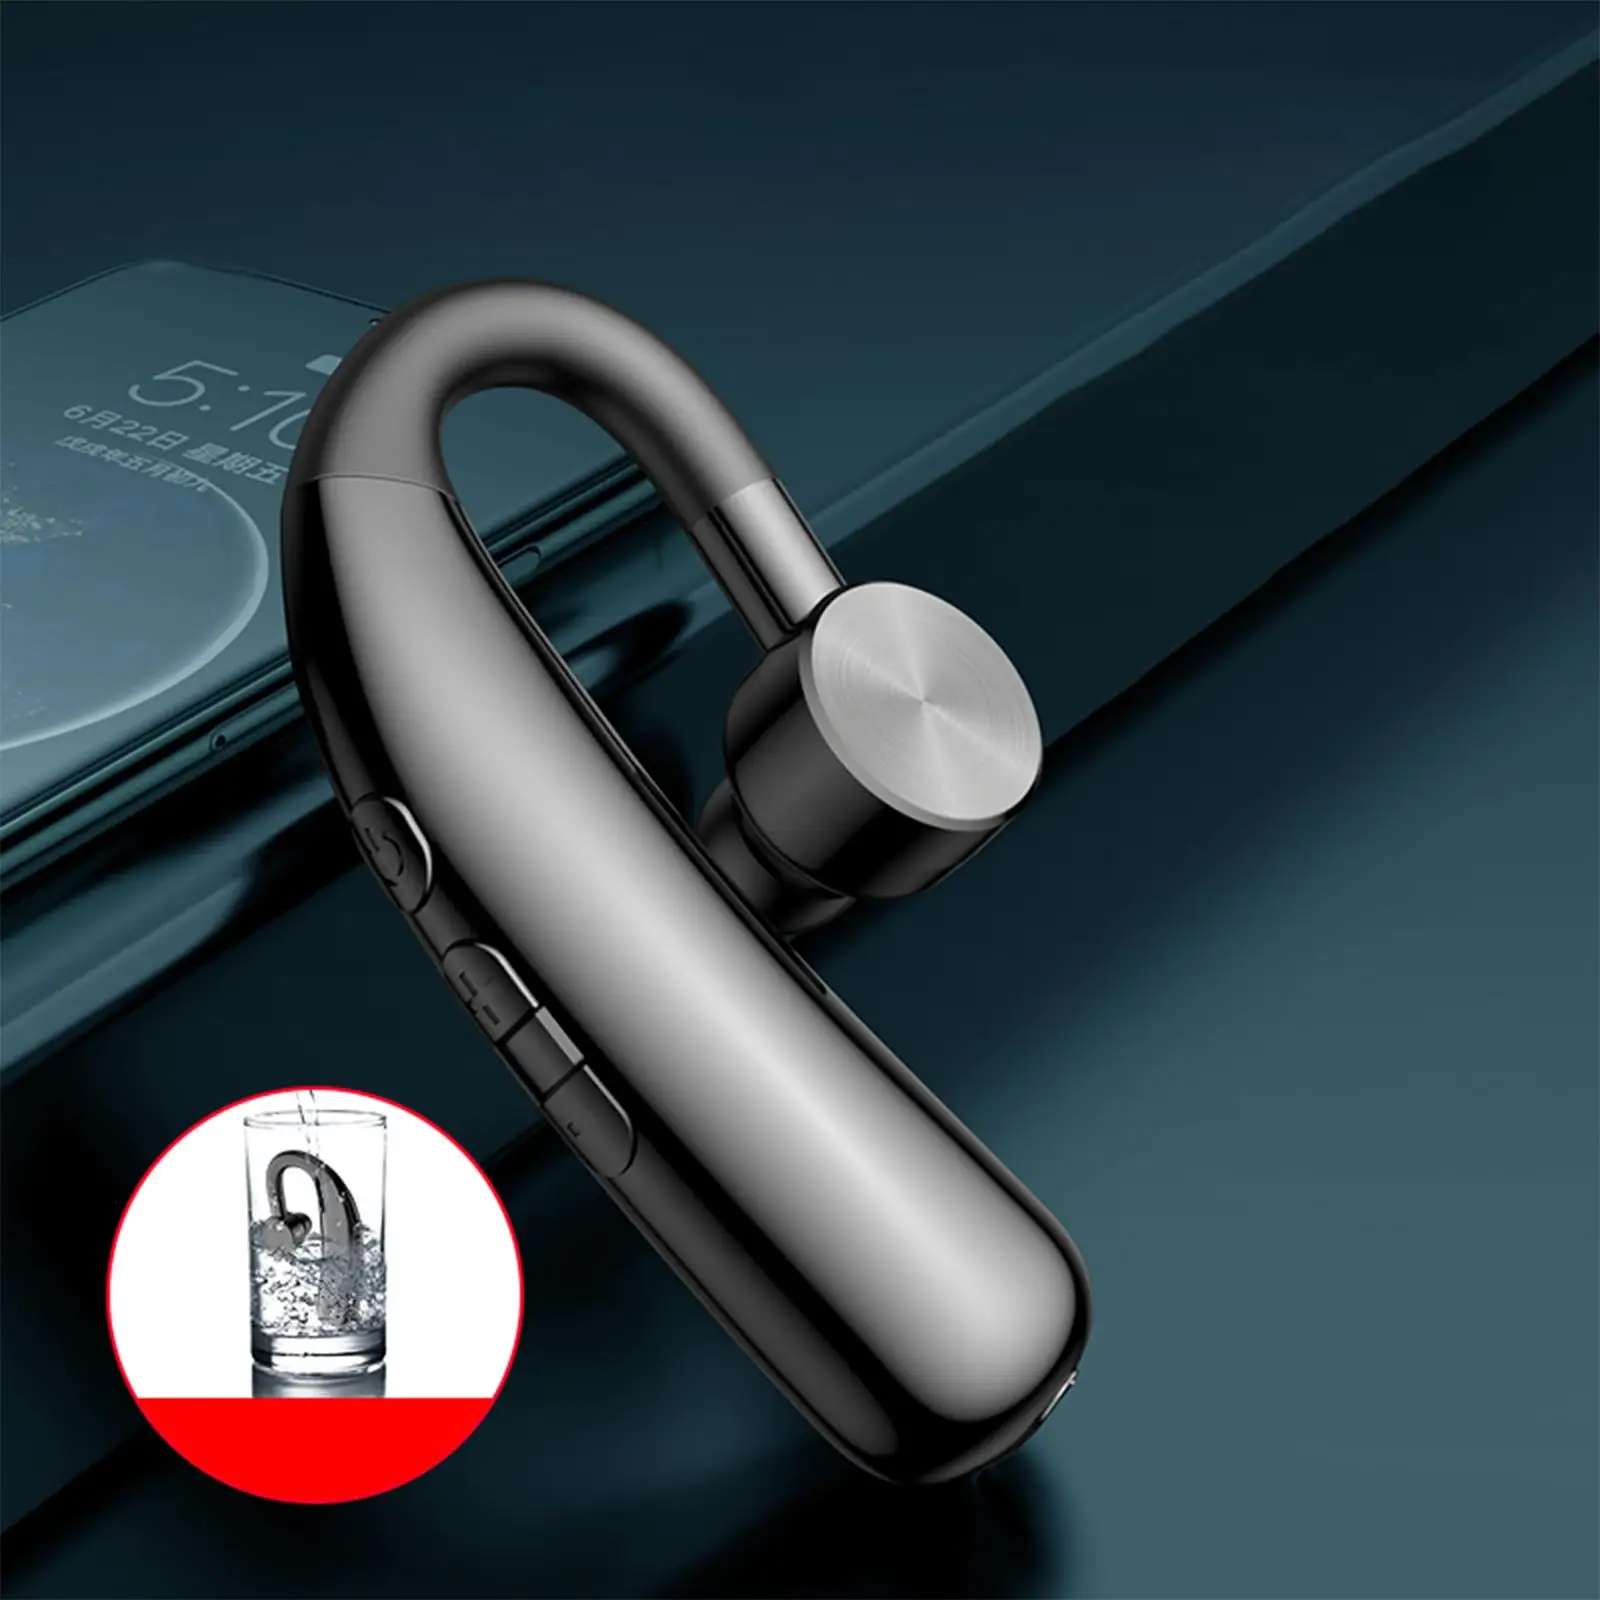 Wireless Bluetooth Headset Lightweight with Built-In Mic V5.0 Earpiece Earphones for Mobile Smartphone Business Tablet Workout